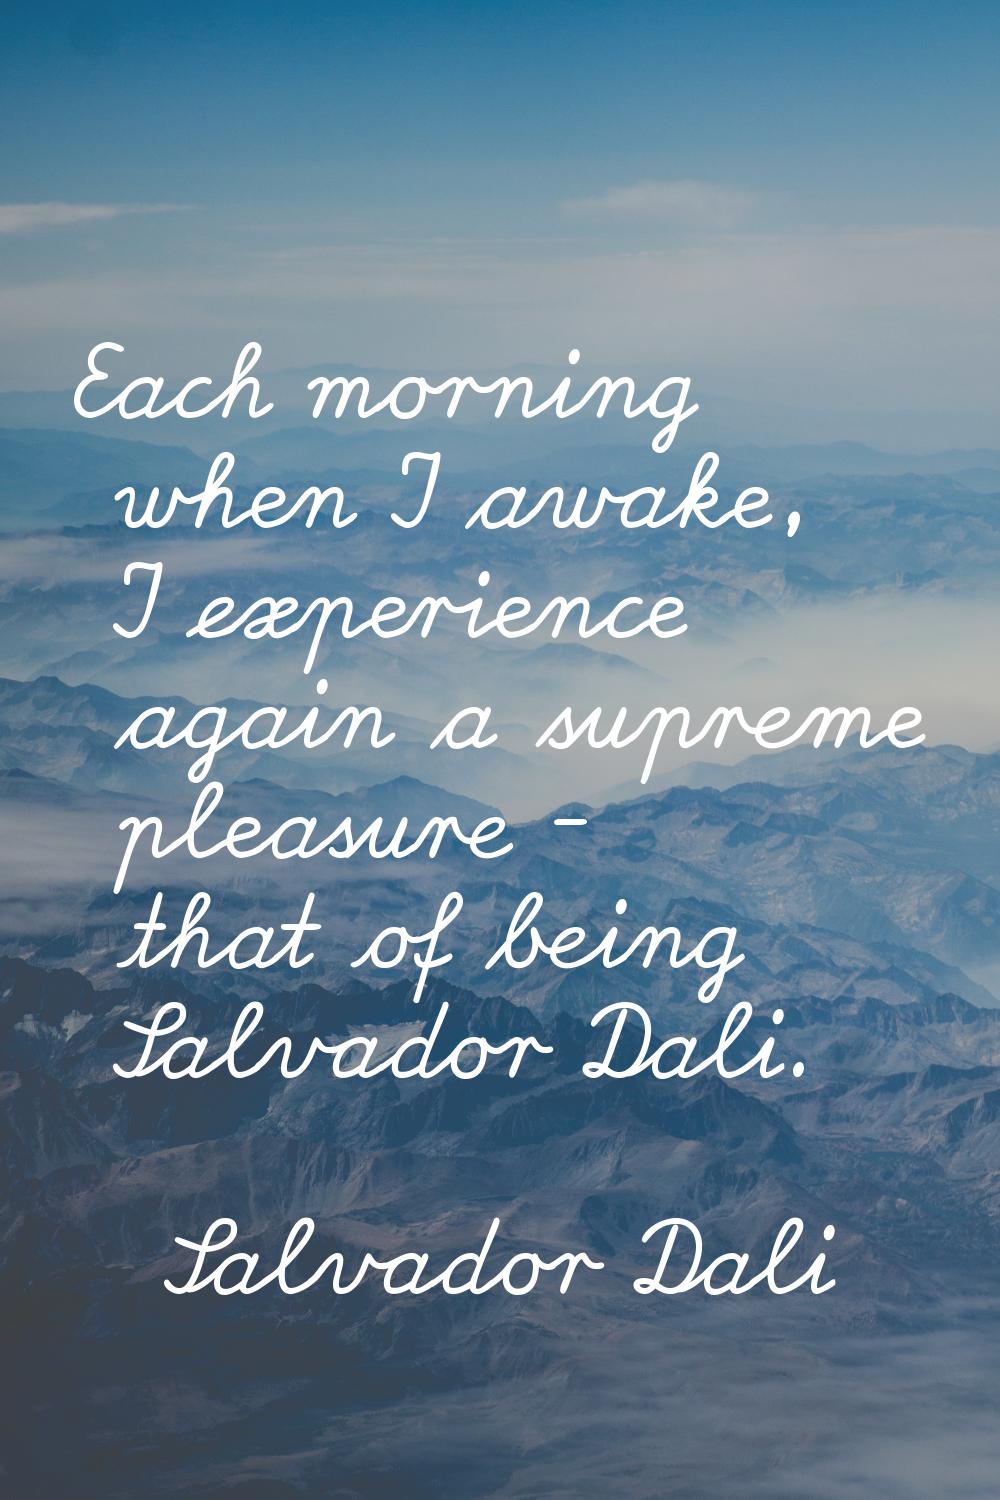 Each morning when I awake, I experience again a supreme pleasure - that of being Salvador Dali.